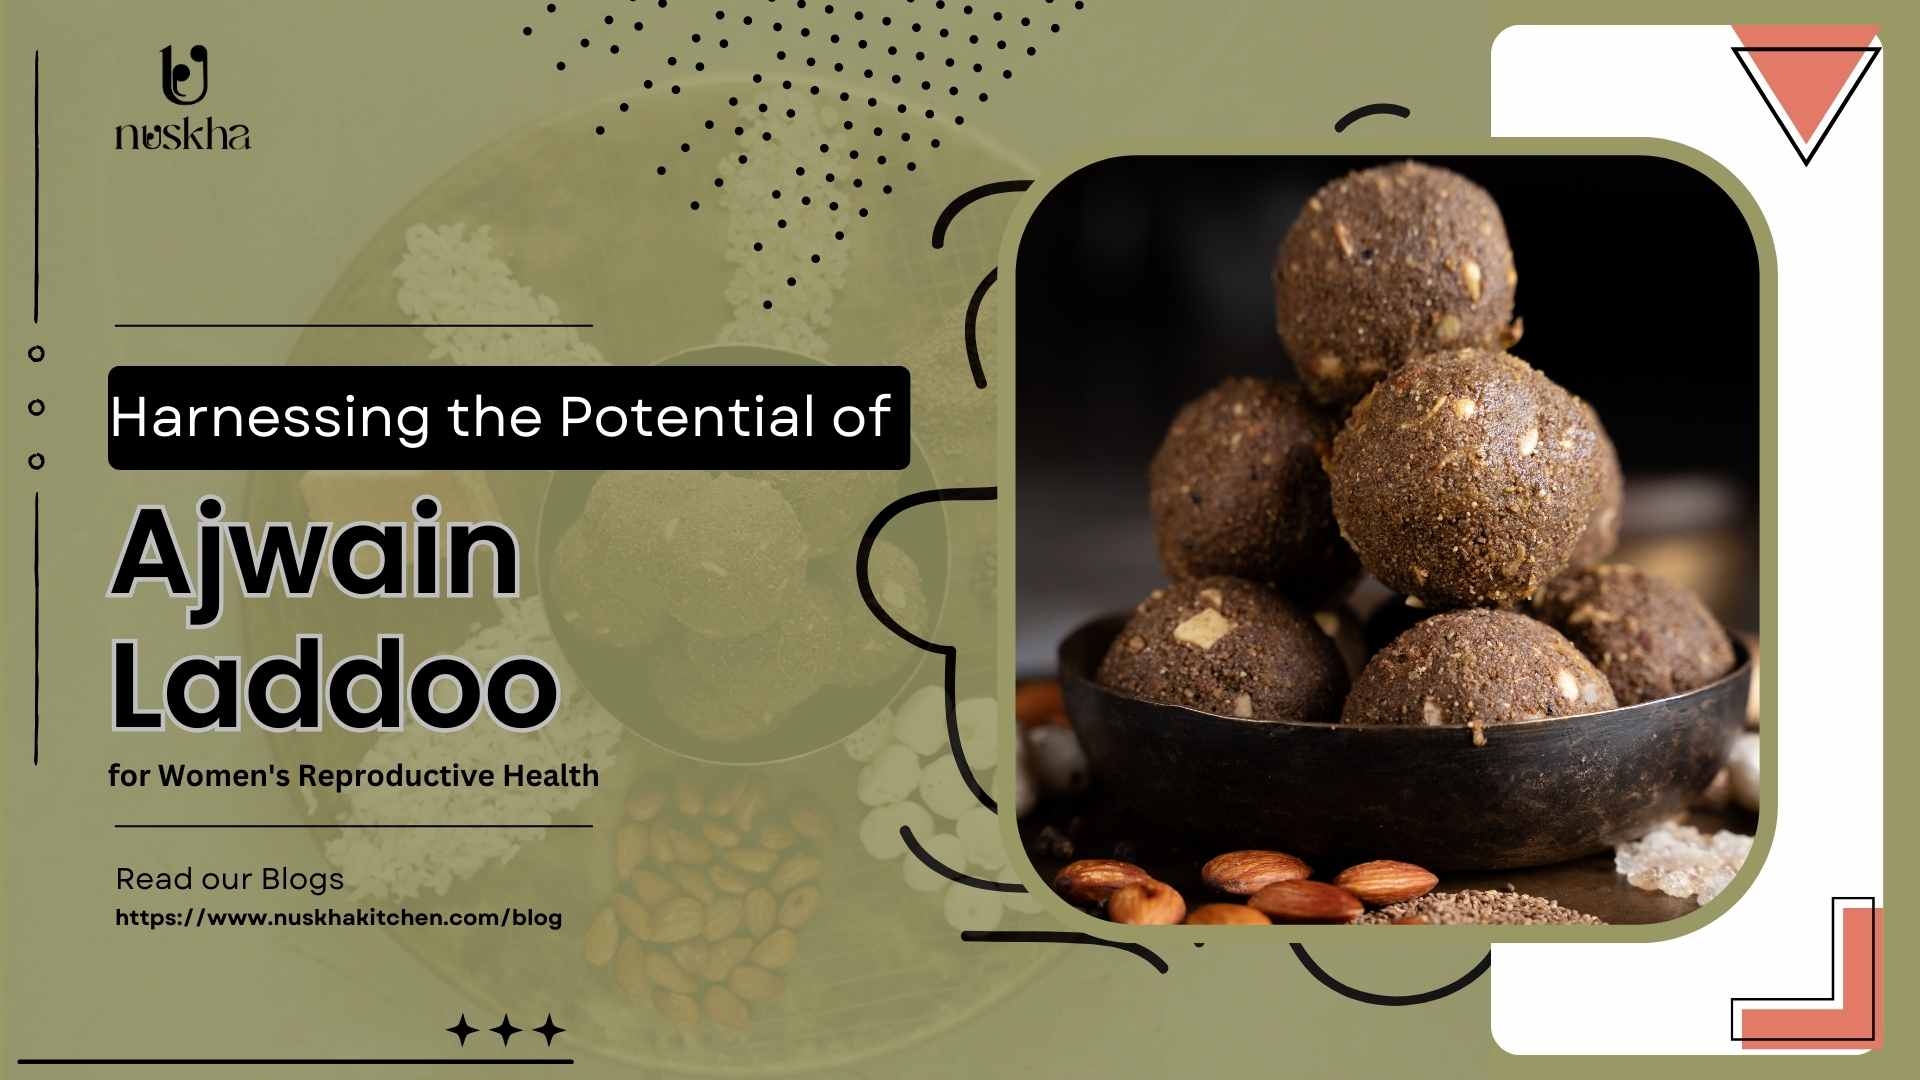 Harnessing the Potential of Ajwain Laddoo for Women's Reproductive Health